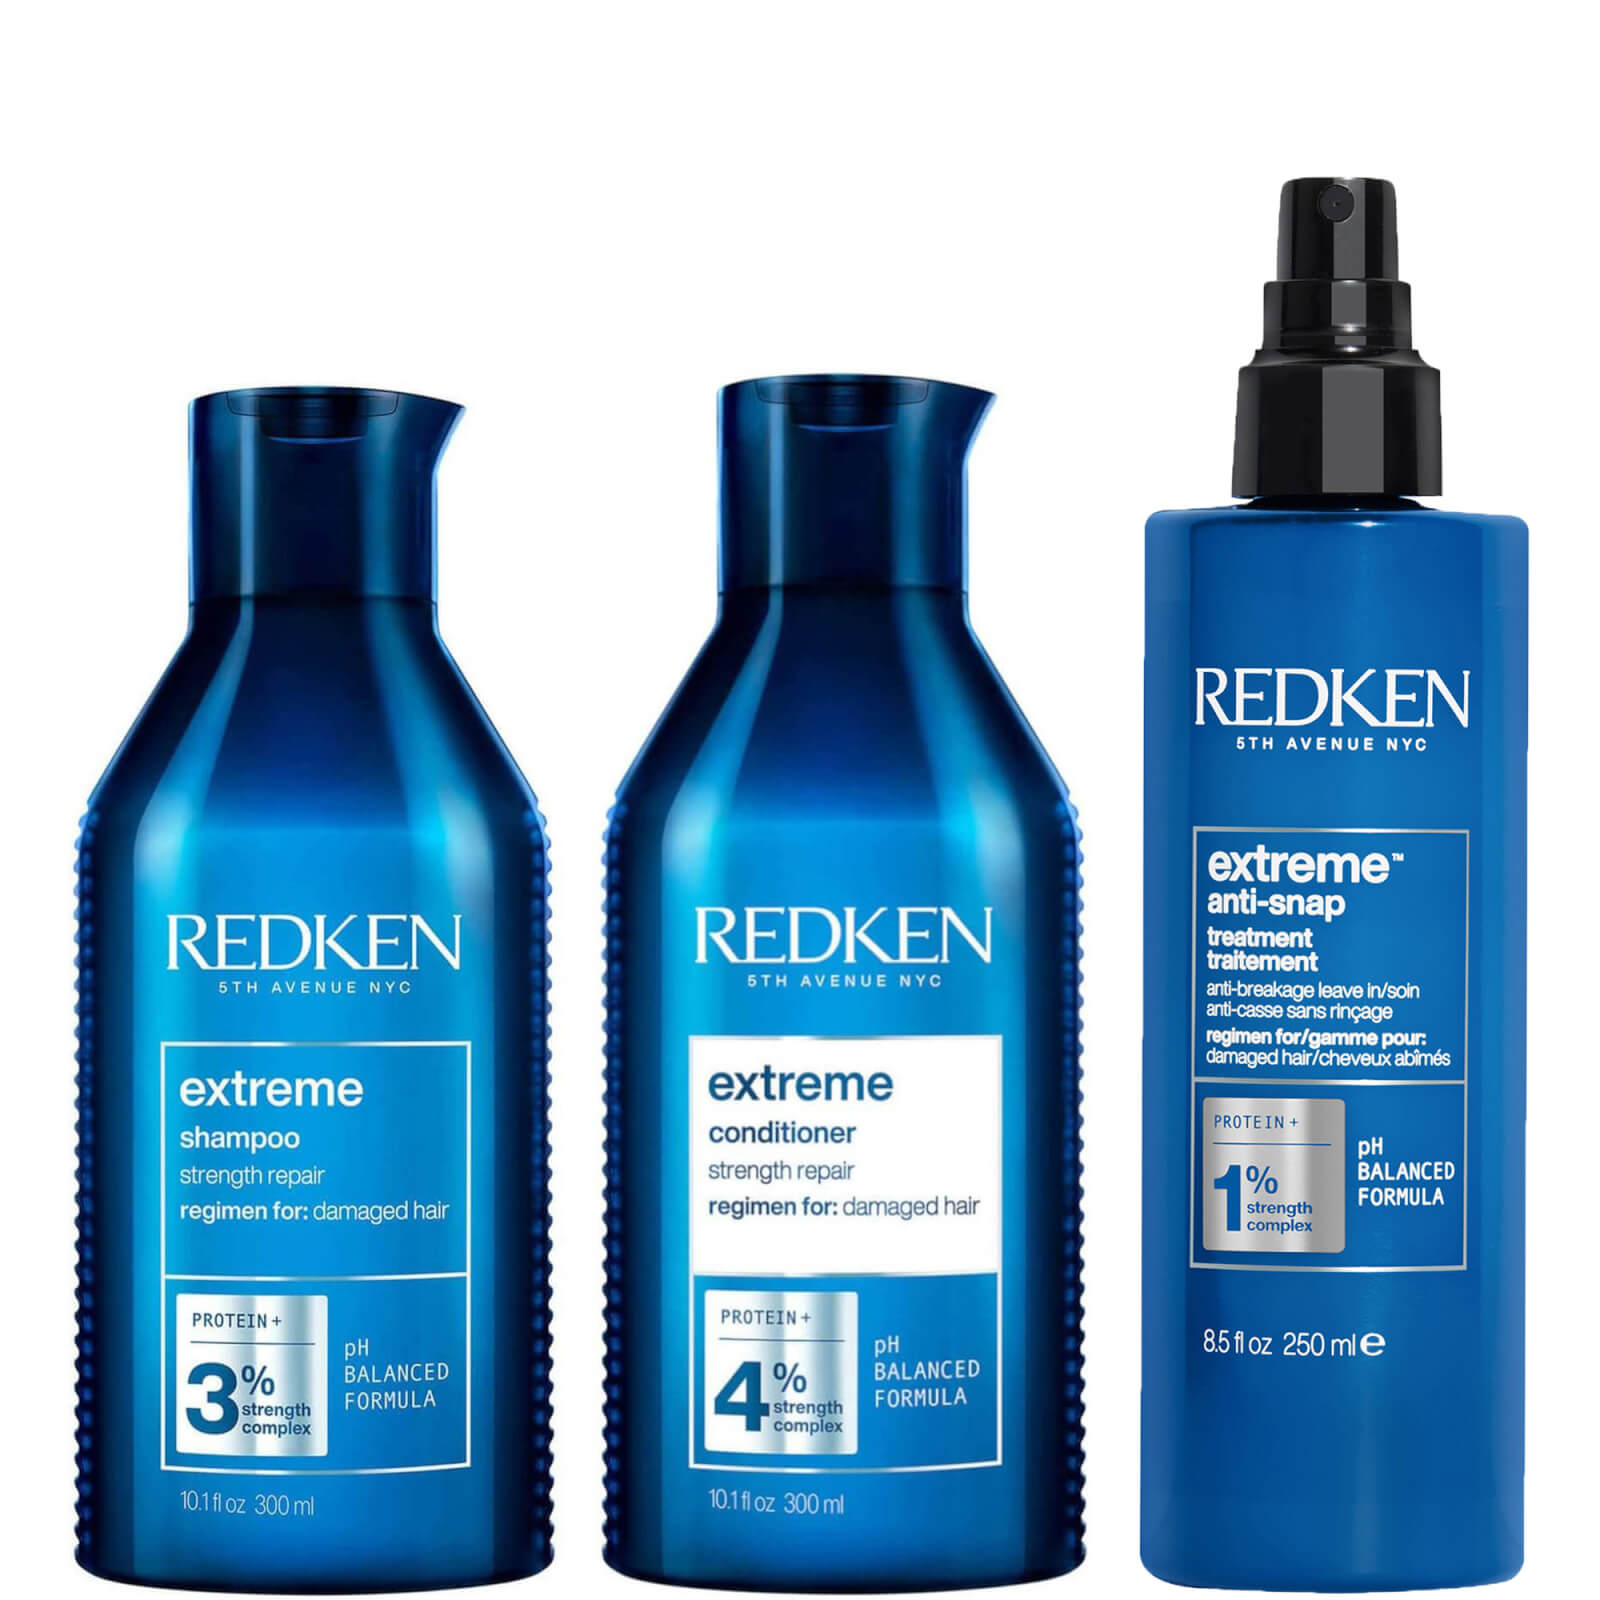 Redken Extreme Shampoo, Conditioner and Anti-Snap Leave-in Treatment Strength Repair Bundle for Dama